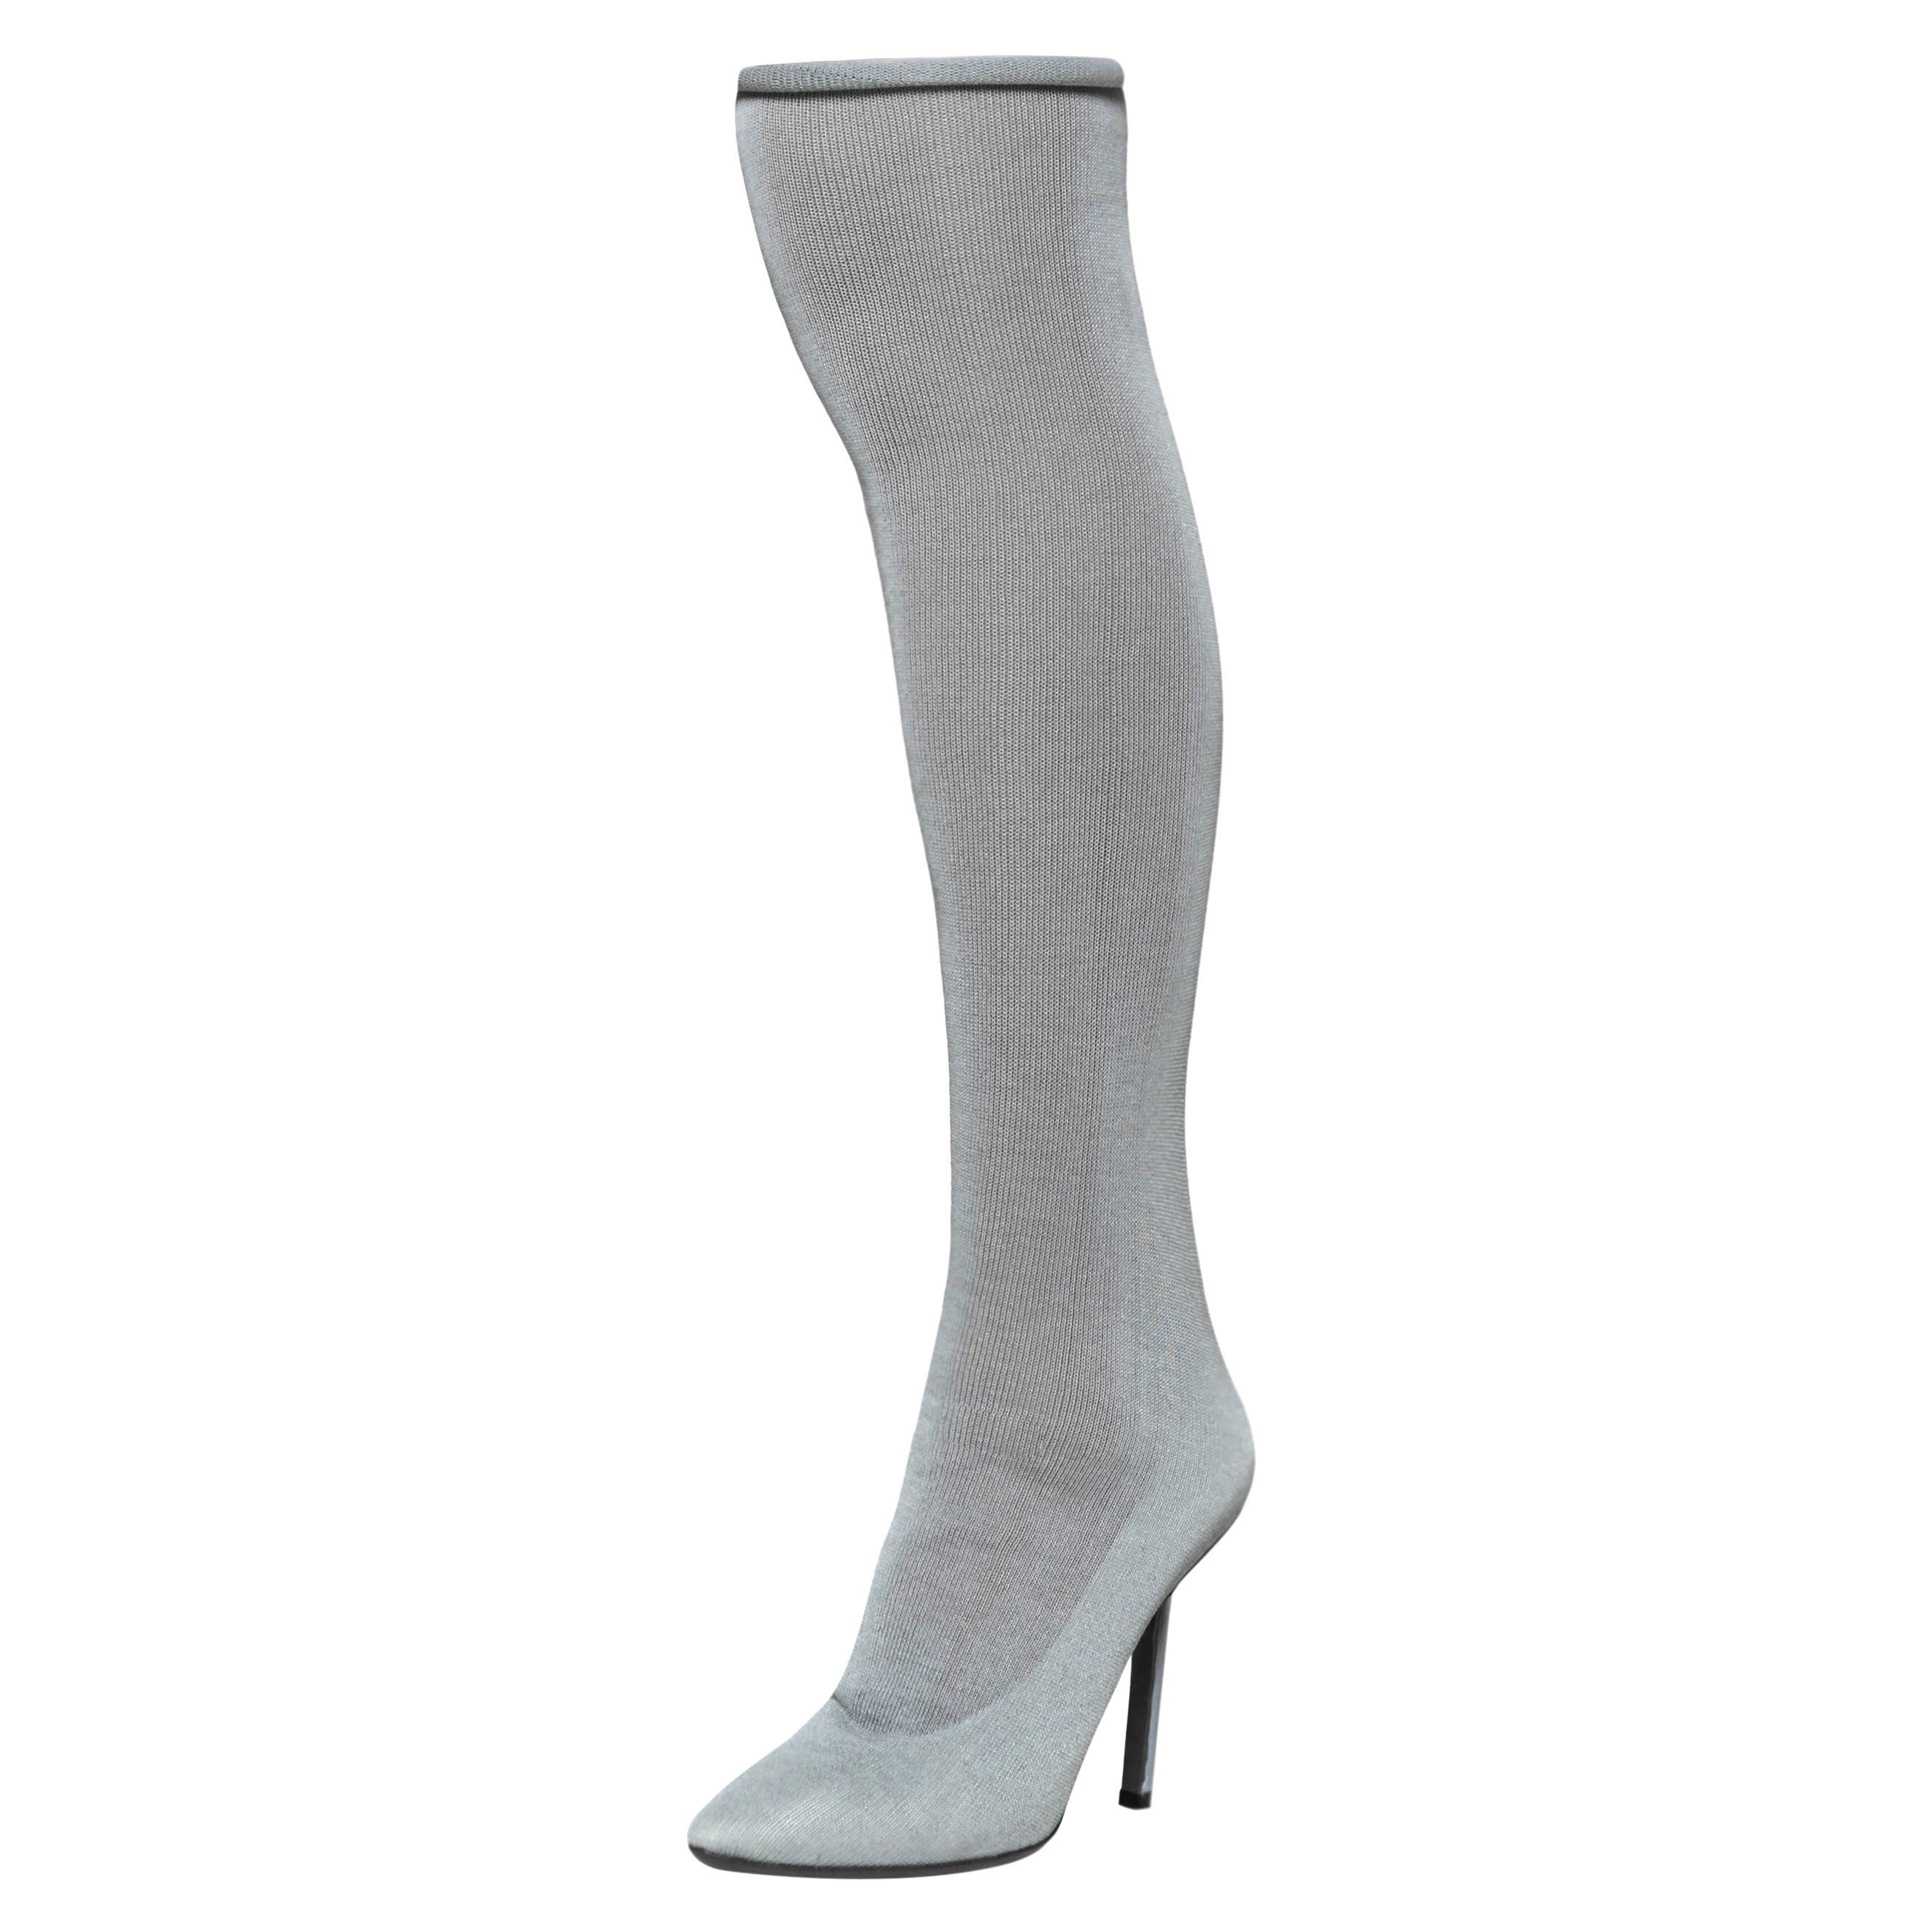 Vetements grey stretch fabric reflective thigh high socks boots size 37